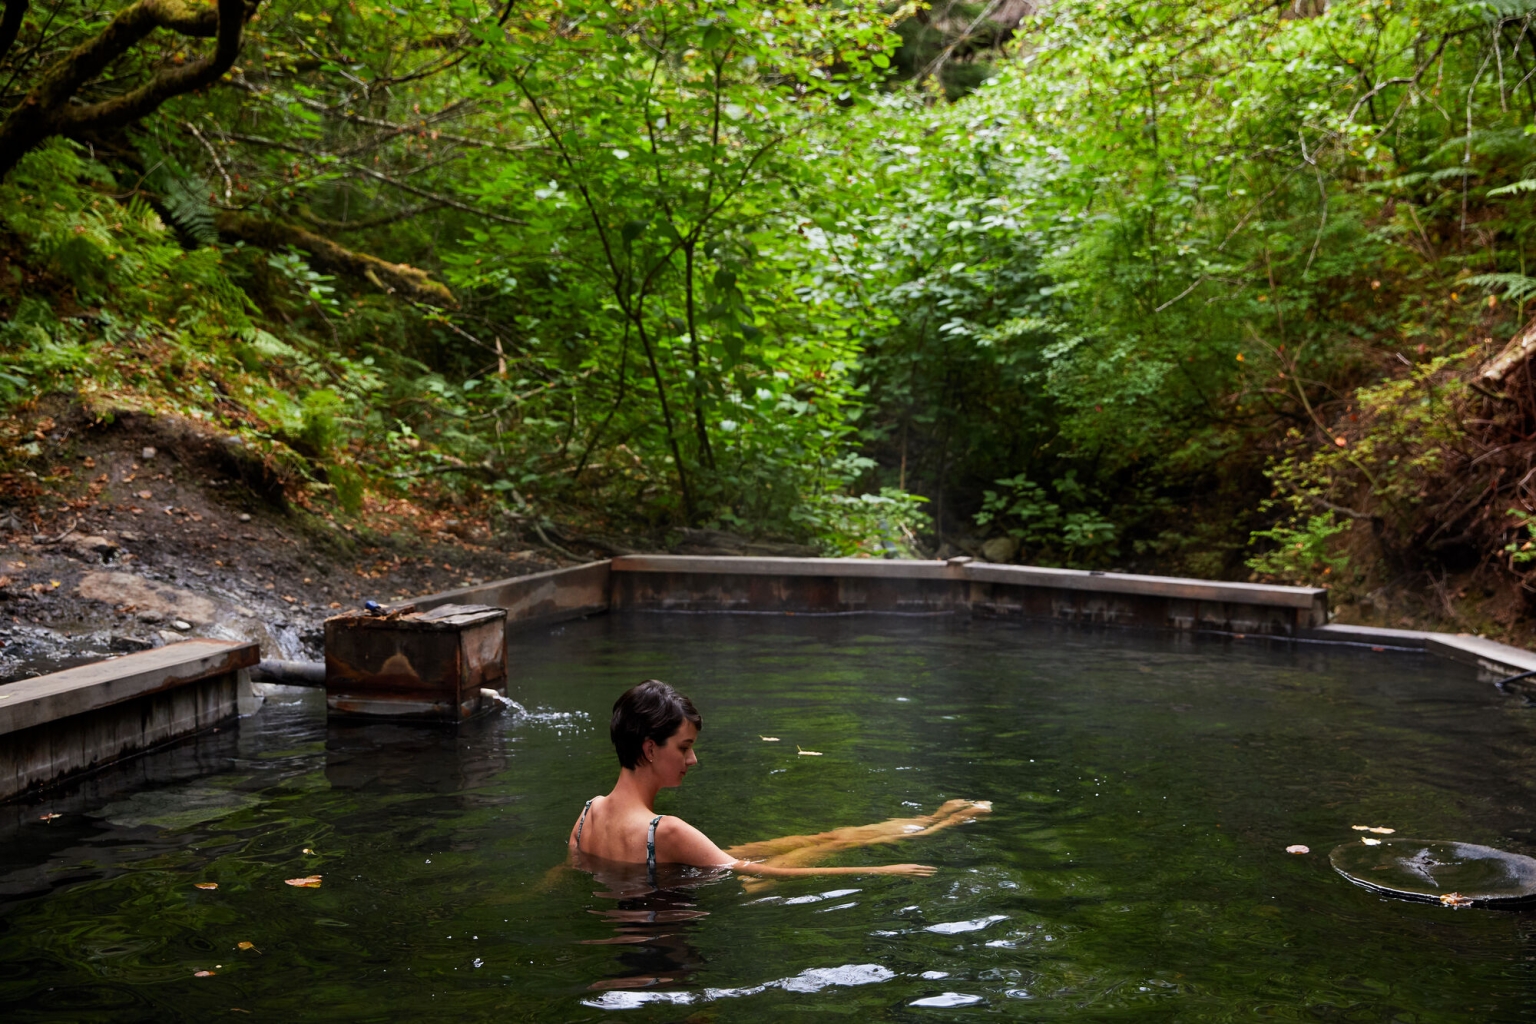 A person soaks in the tub at the Aiyansh Hot Springs in the Nass Valley.